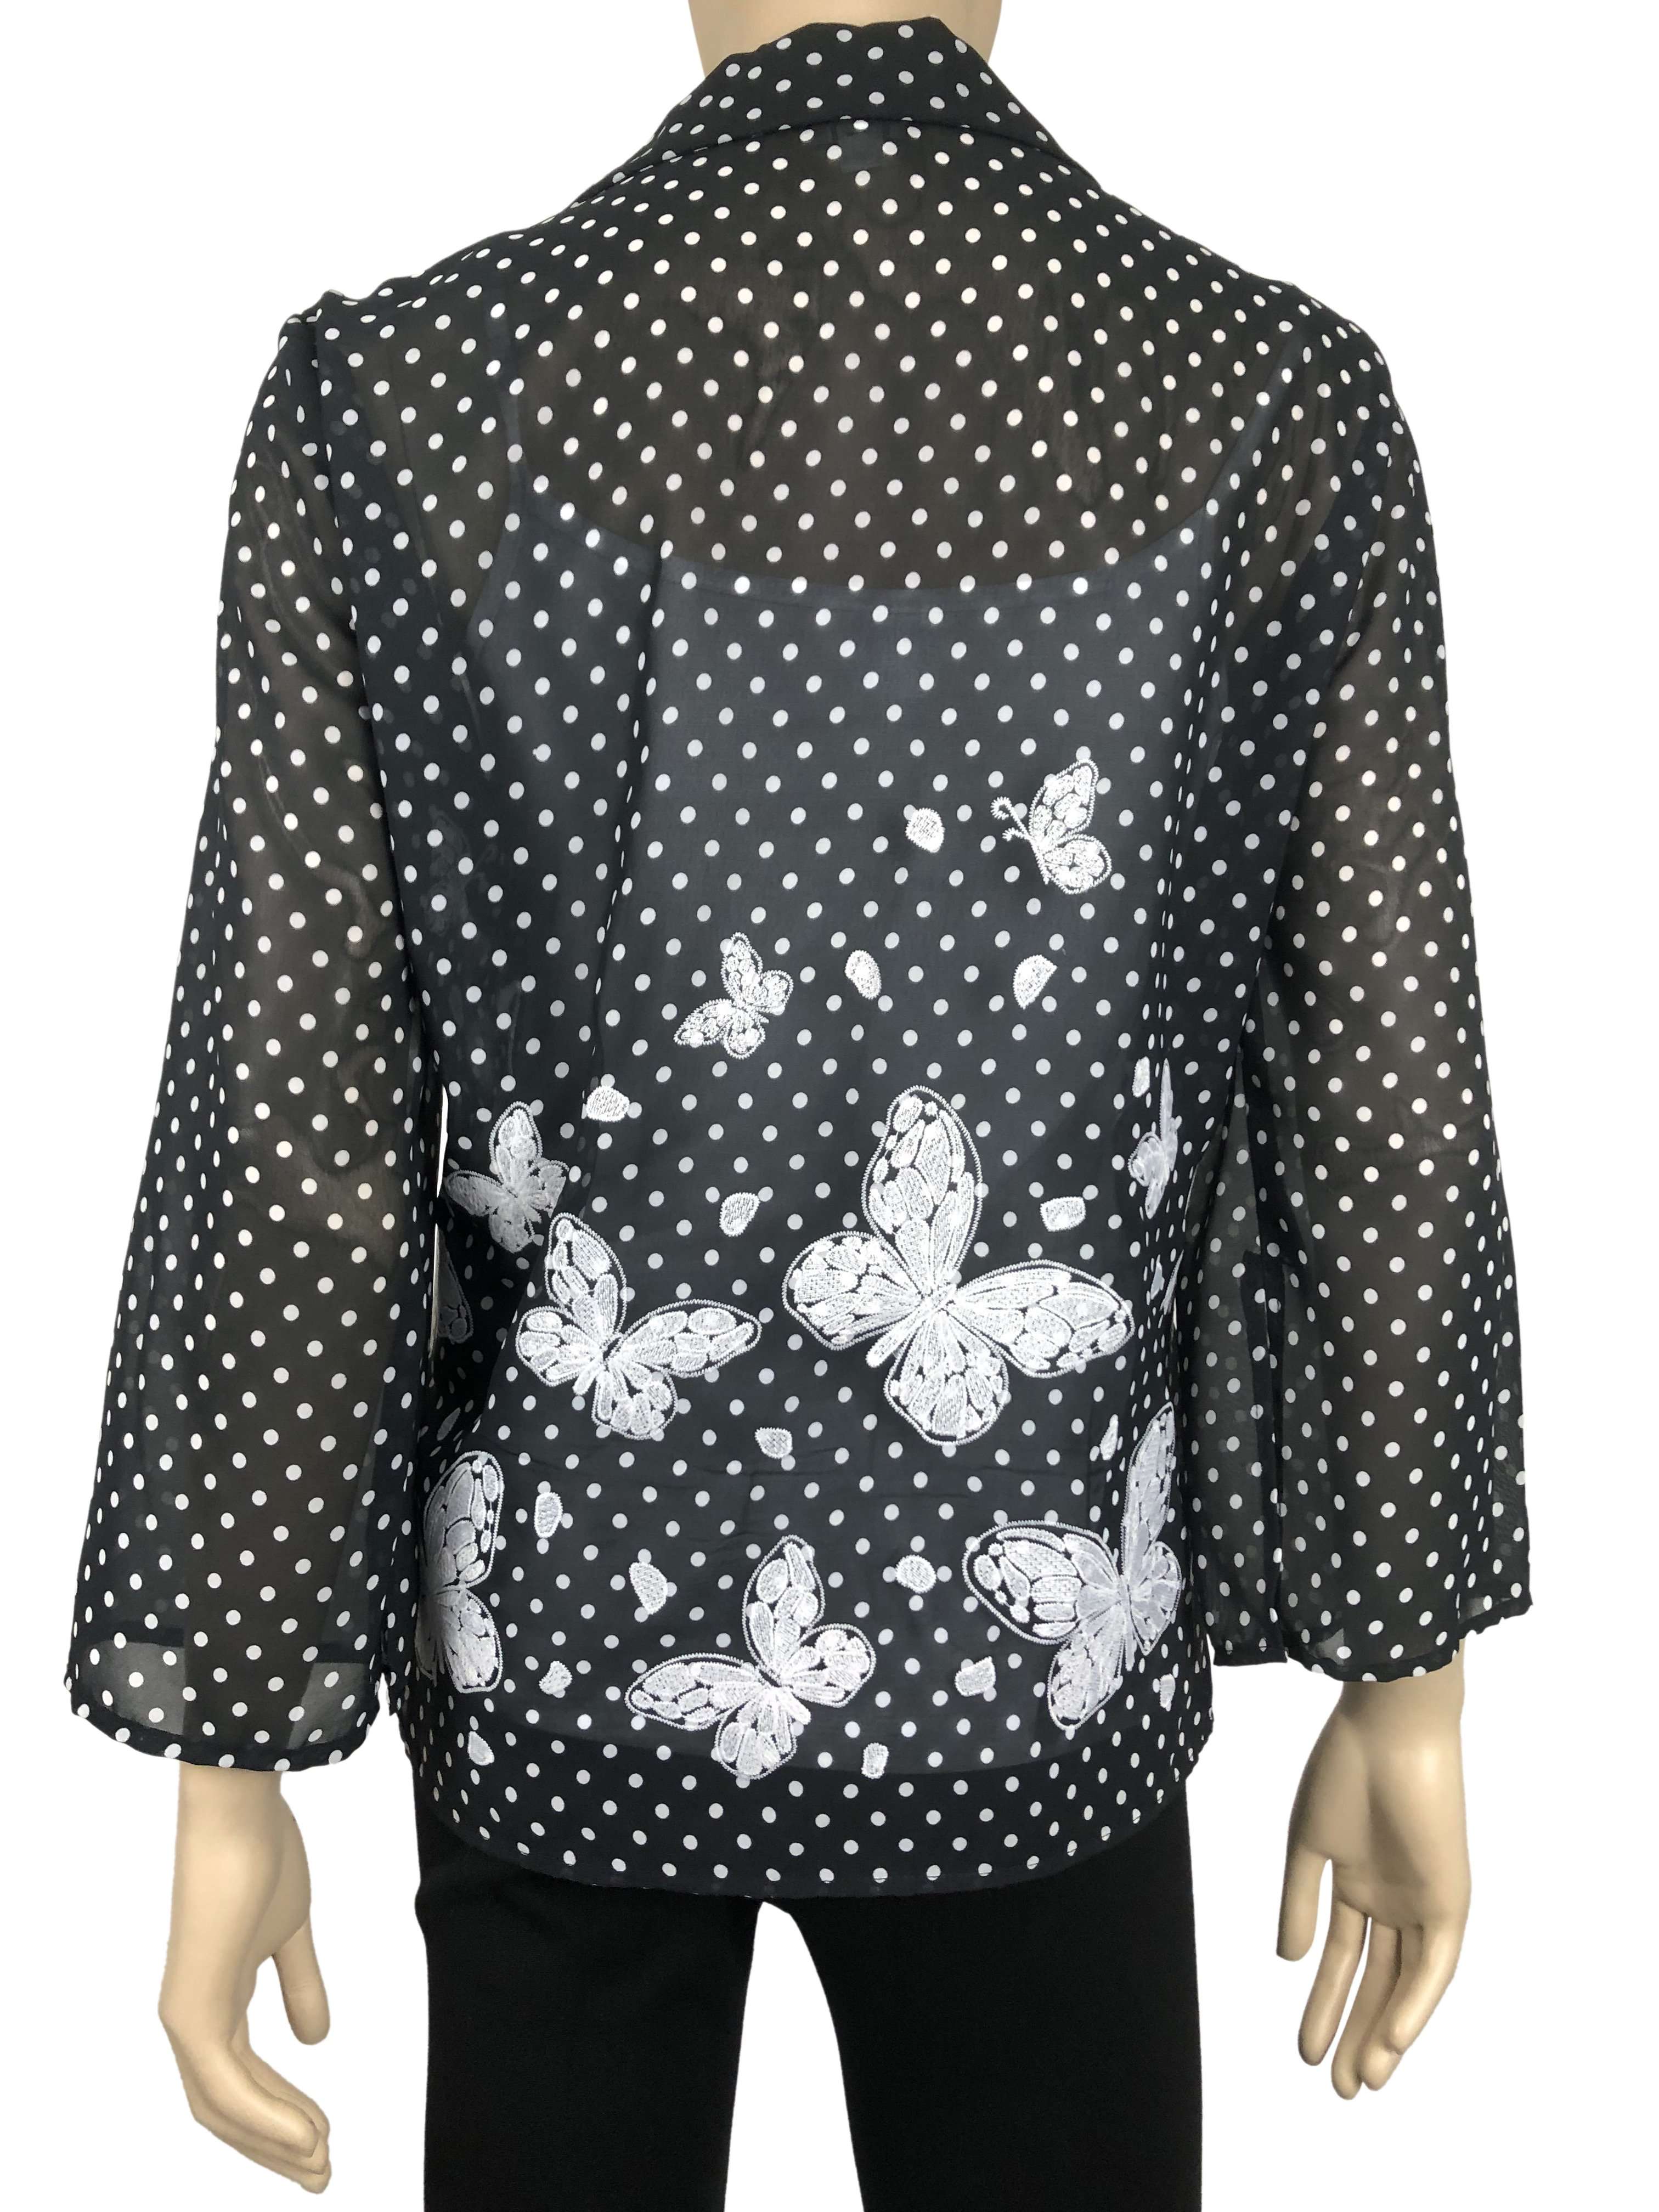 Women's Blouse Black Polka Dot Embroidered Butterfly Chiffon Fabric - Made in Canada - Yvonne Marie - Yvonne Marie